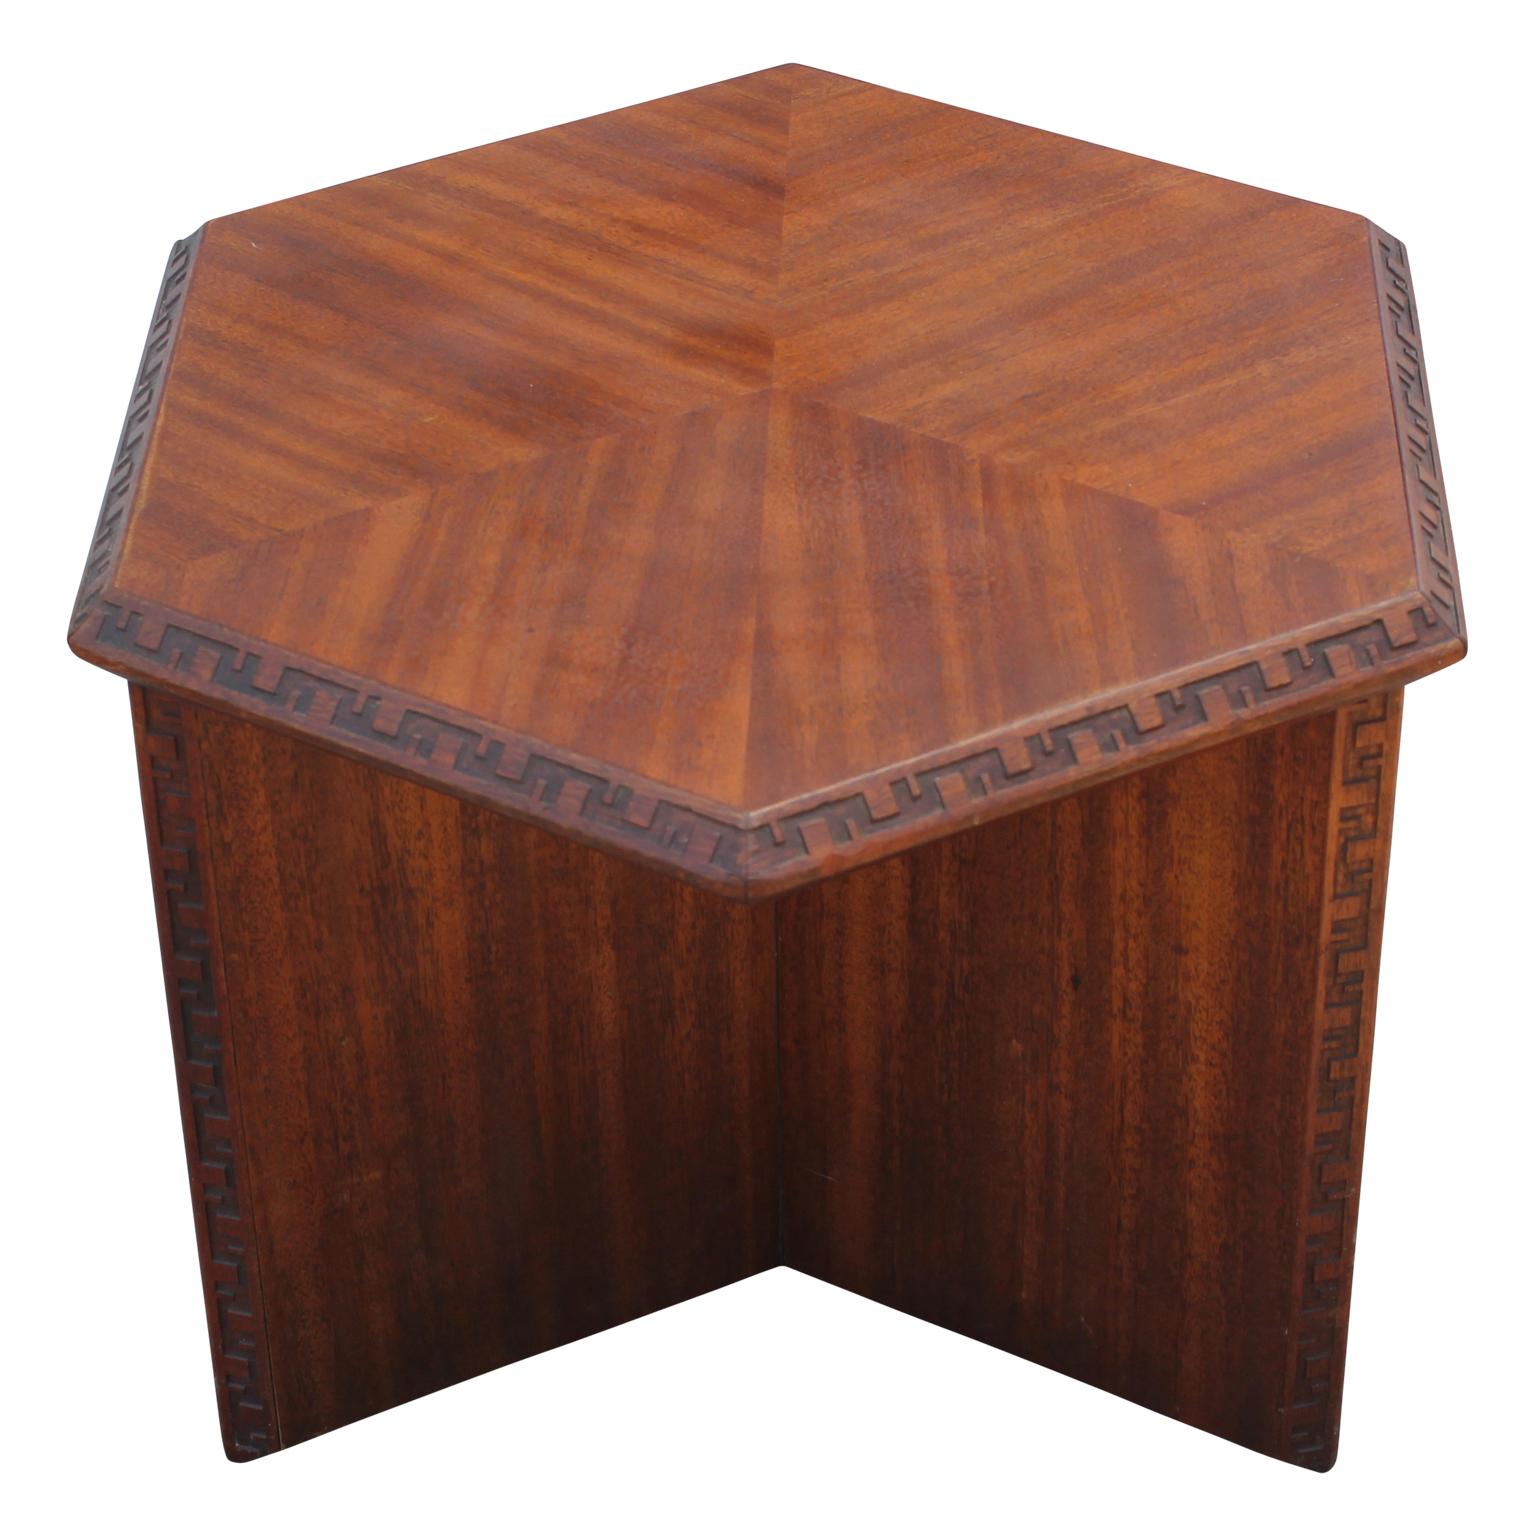 Stunning pair of hexagon end tables by Frank Lloyd Wright. He made them for Henredon and added a Greek key design along the edges of the tables. Both tables are signed on the bottom of the tabletop and have his logo on the table leg.